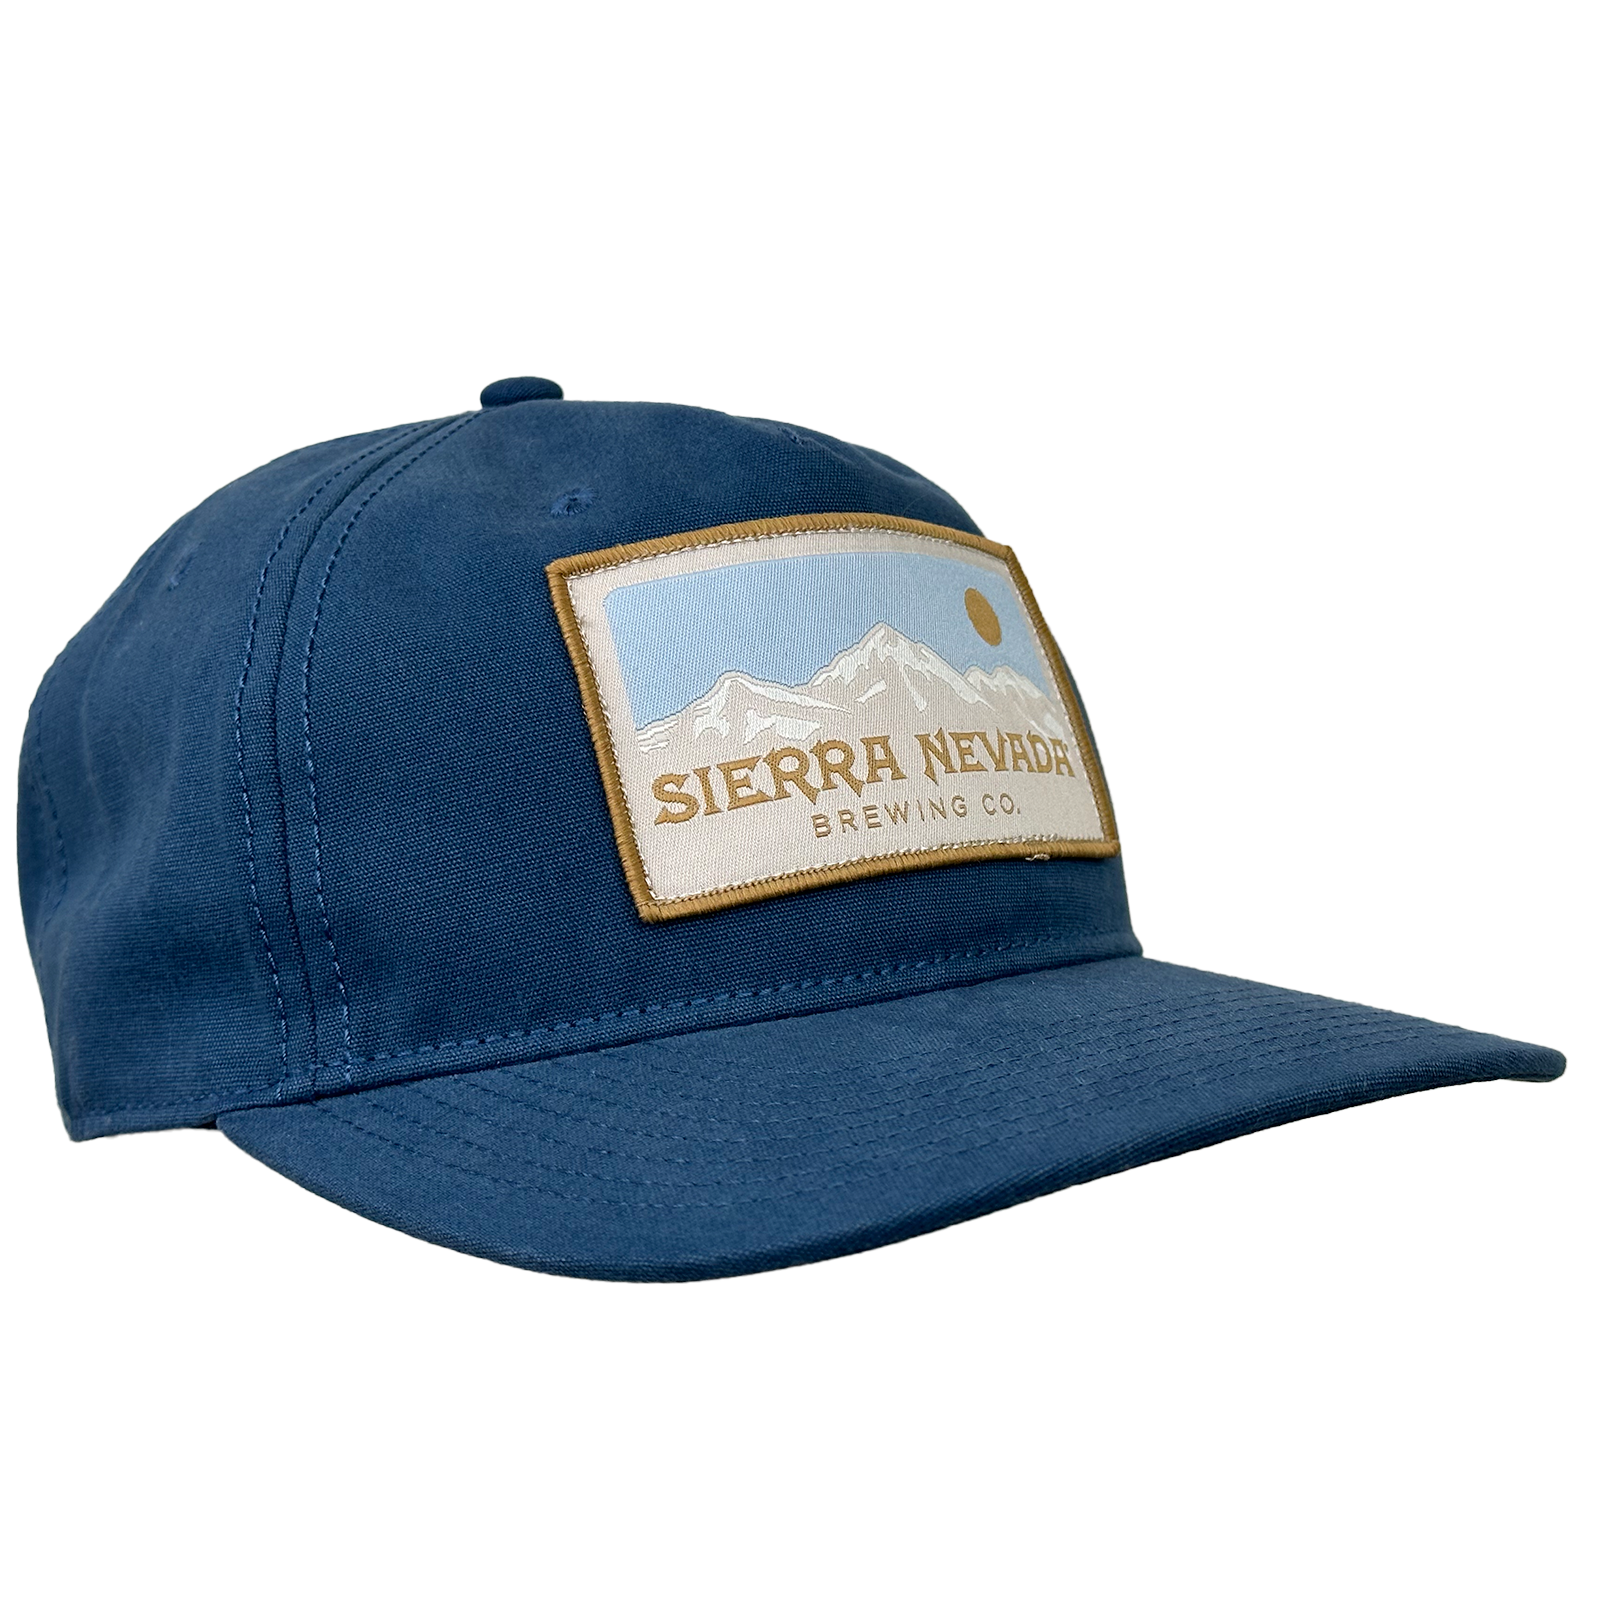 Sierra Nevada Brewing Co. Classic Golfer Hat - front view featuring logo patch